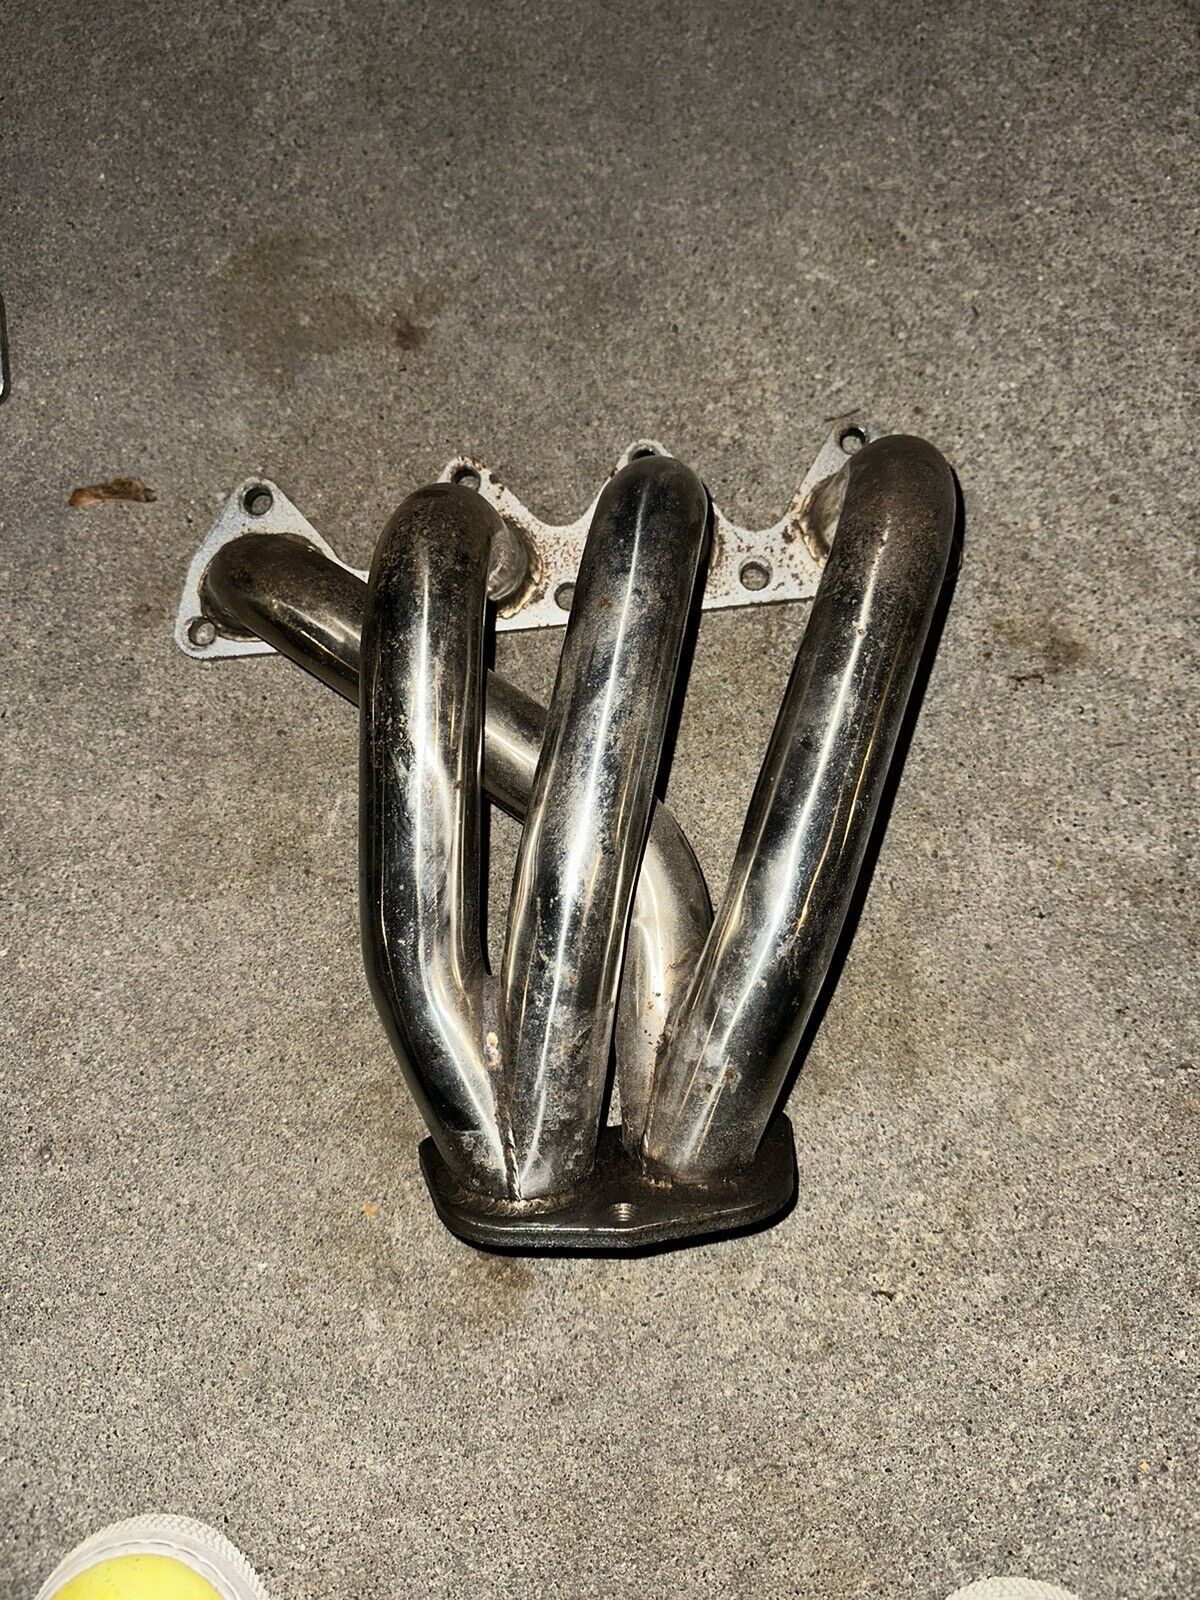 B18 Headers And J Pipe